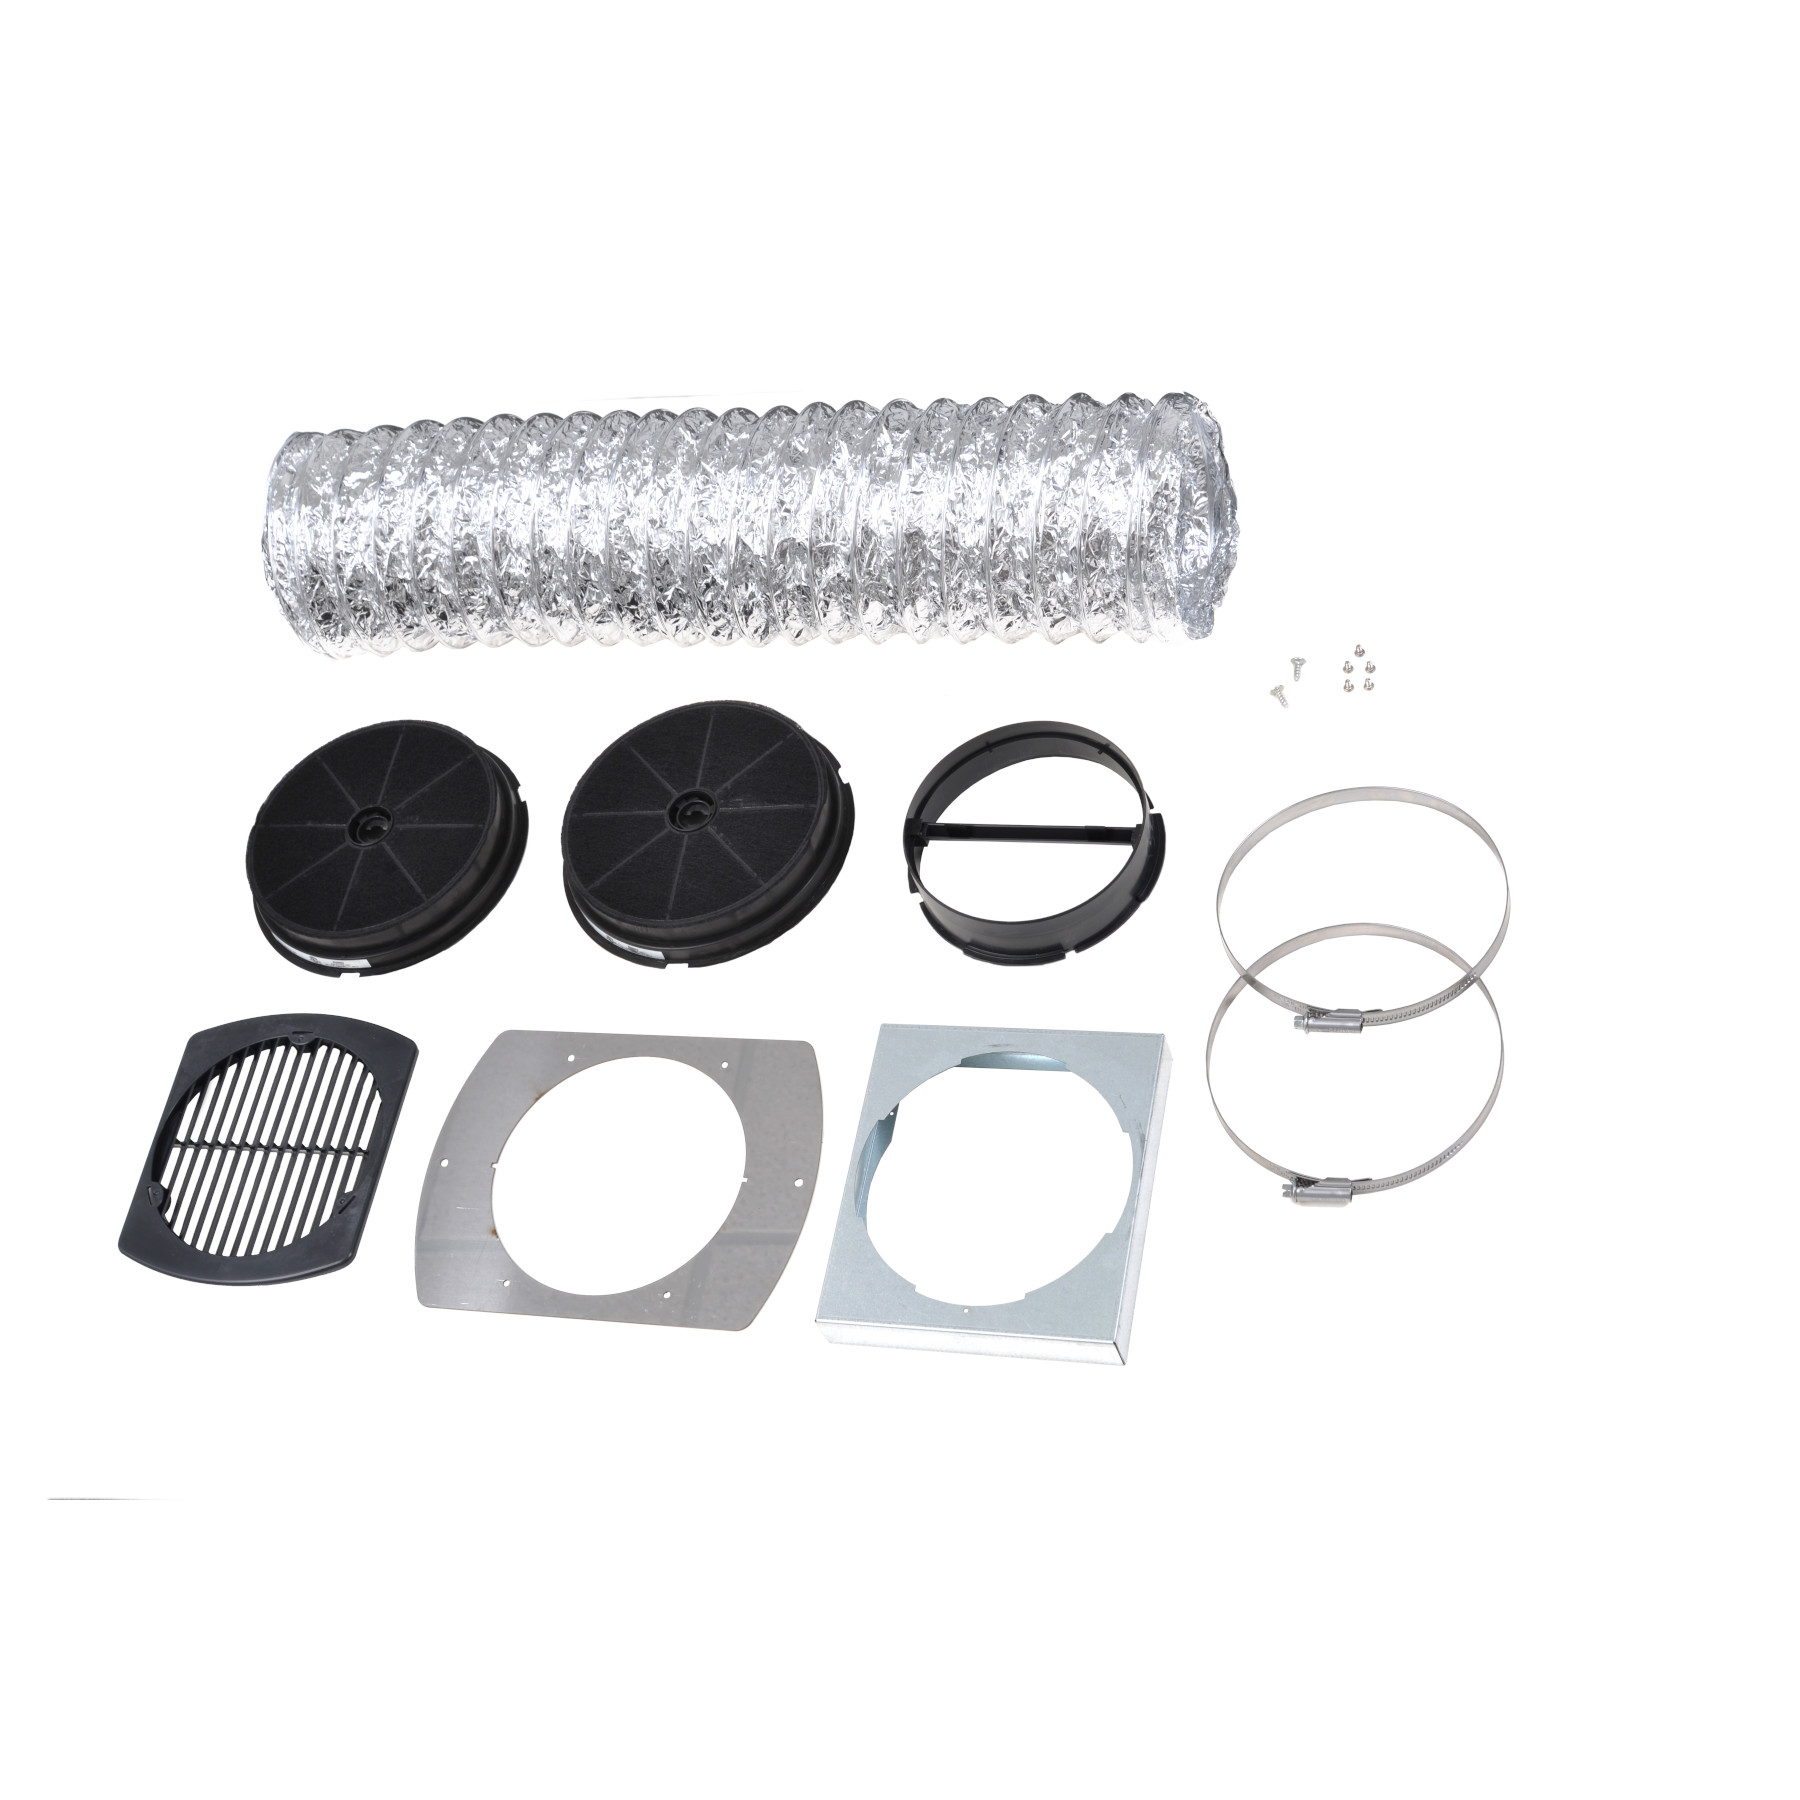 Optional Non-Duct Kit for Broan® Elite EBS1 Slide-out series